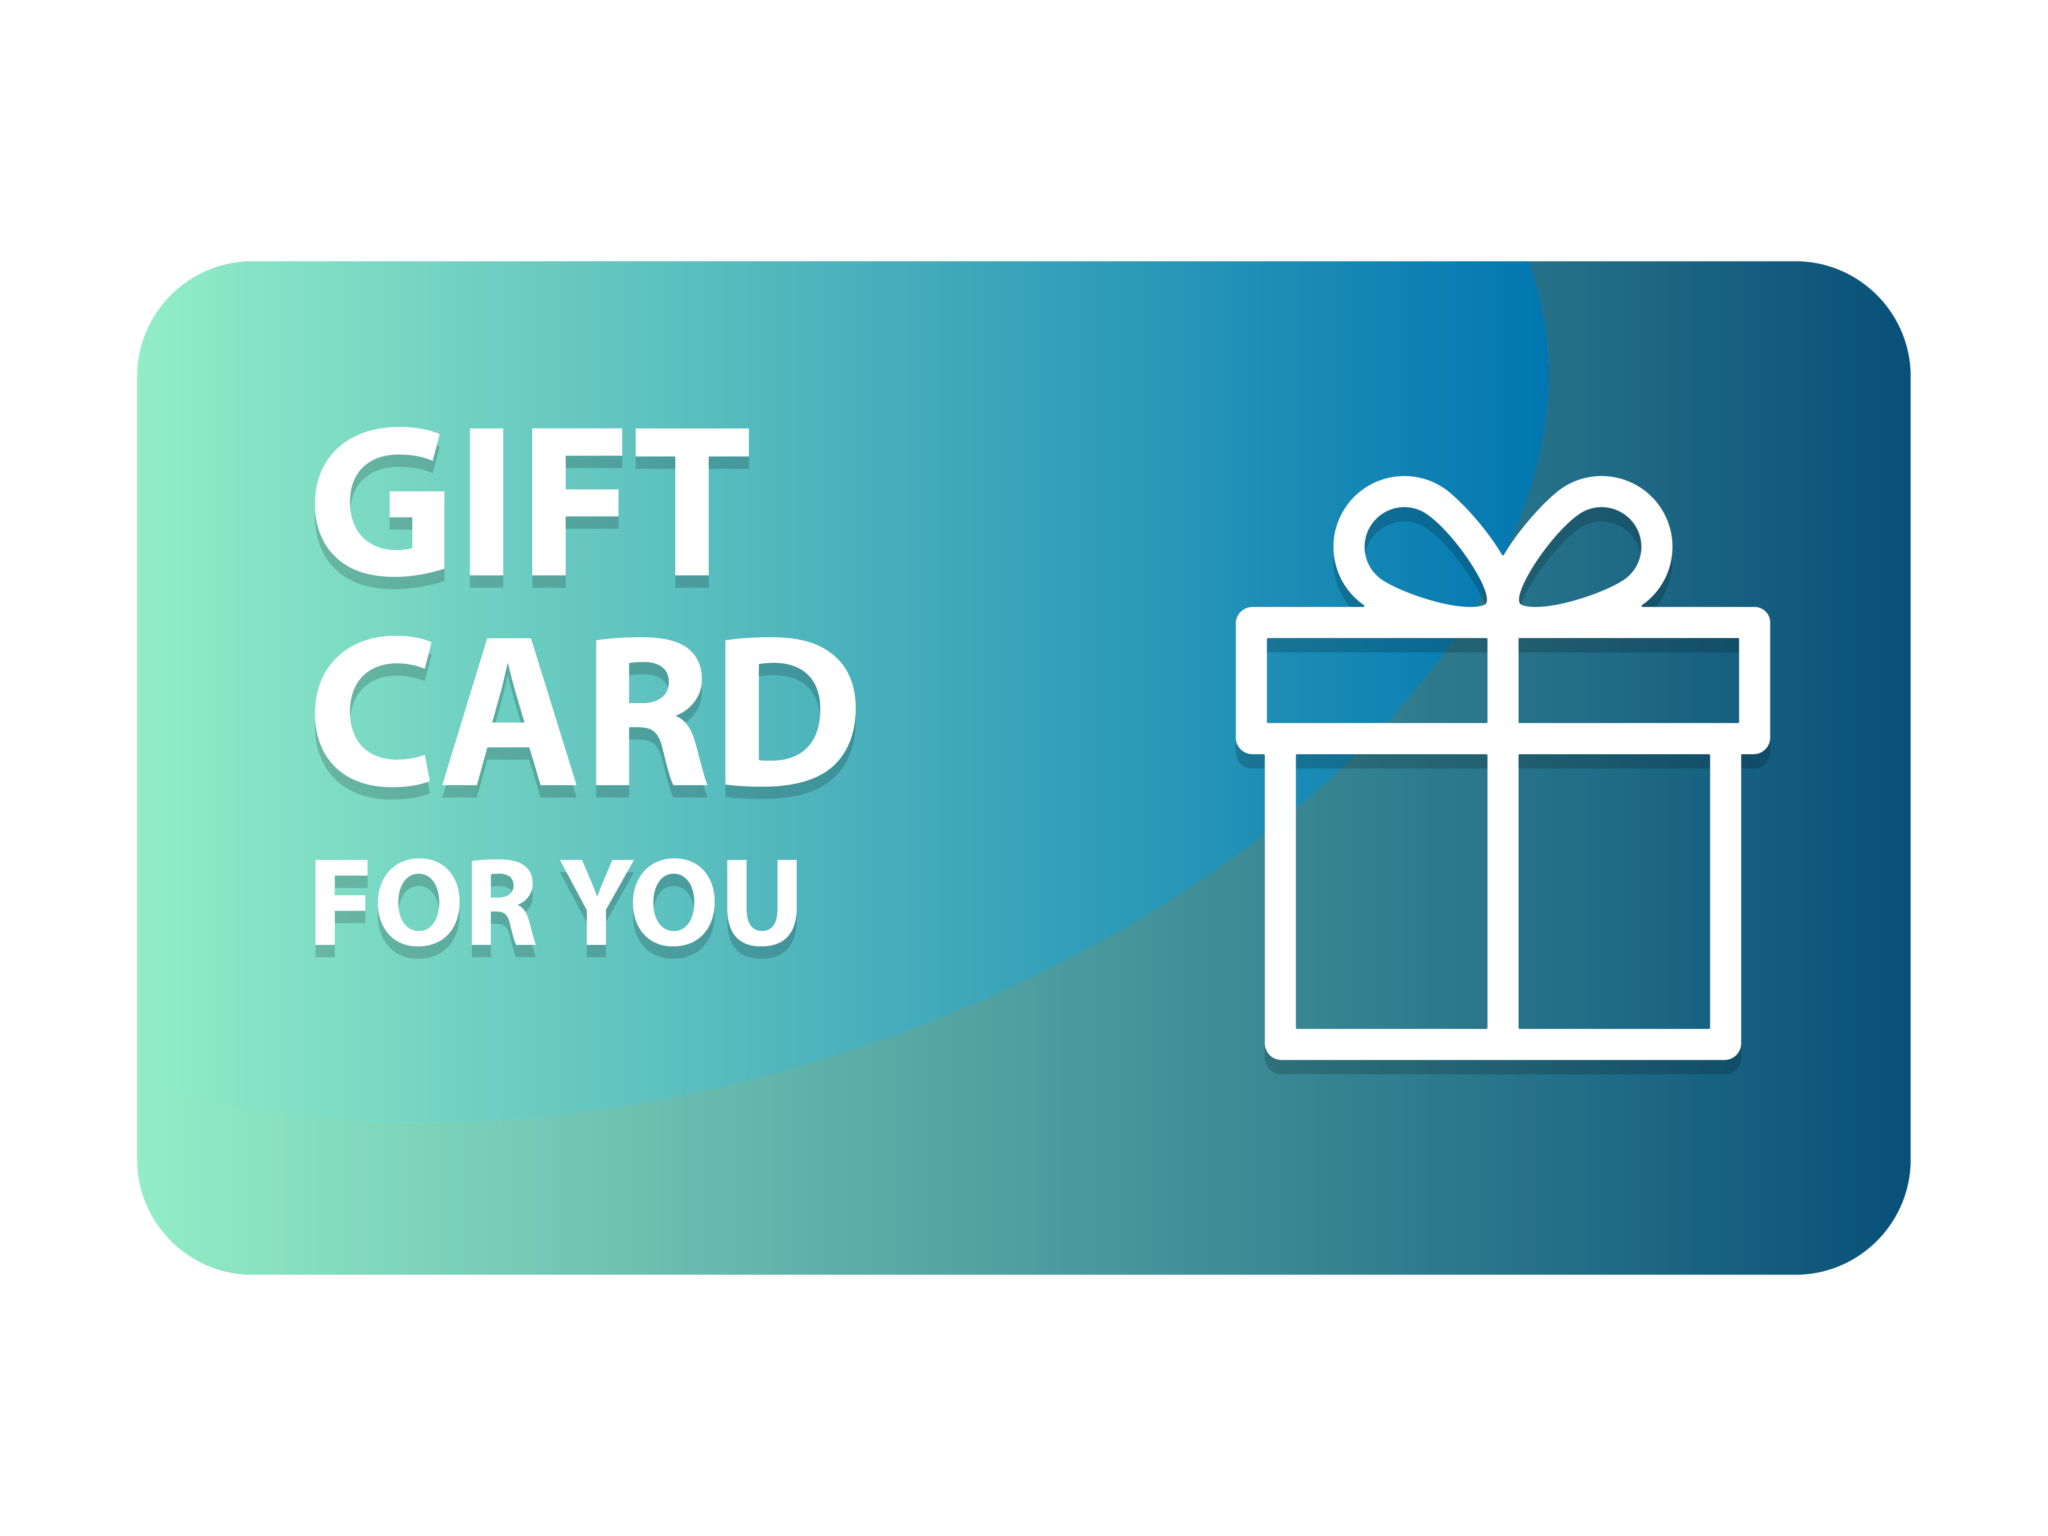 estes audiology gift cards for hearing aids in TX or LA